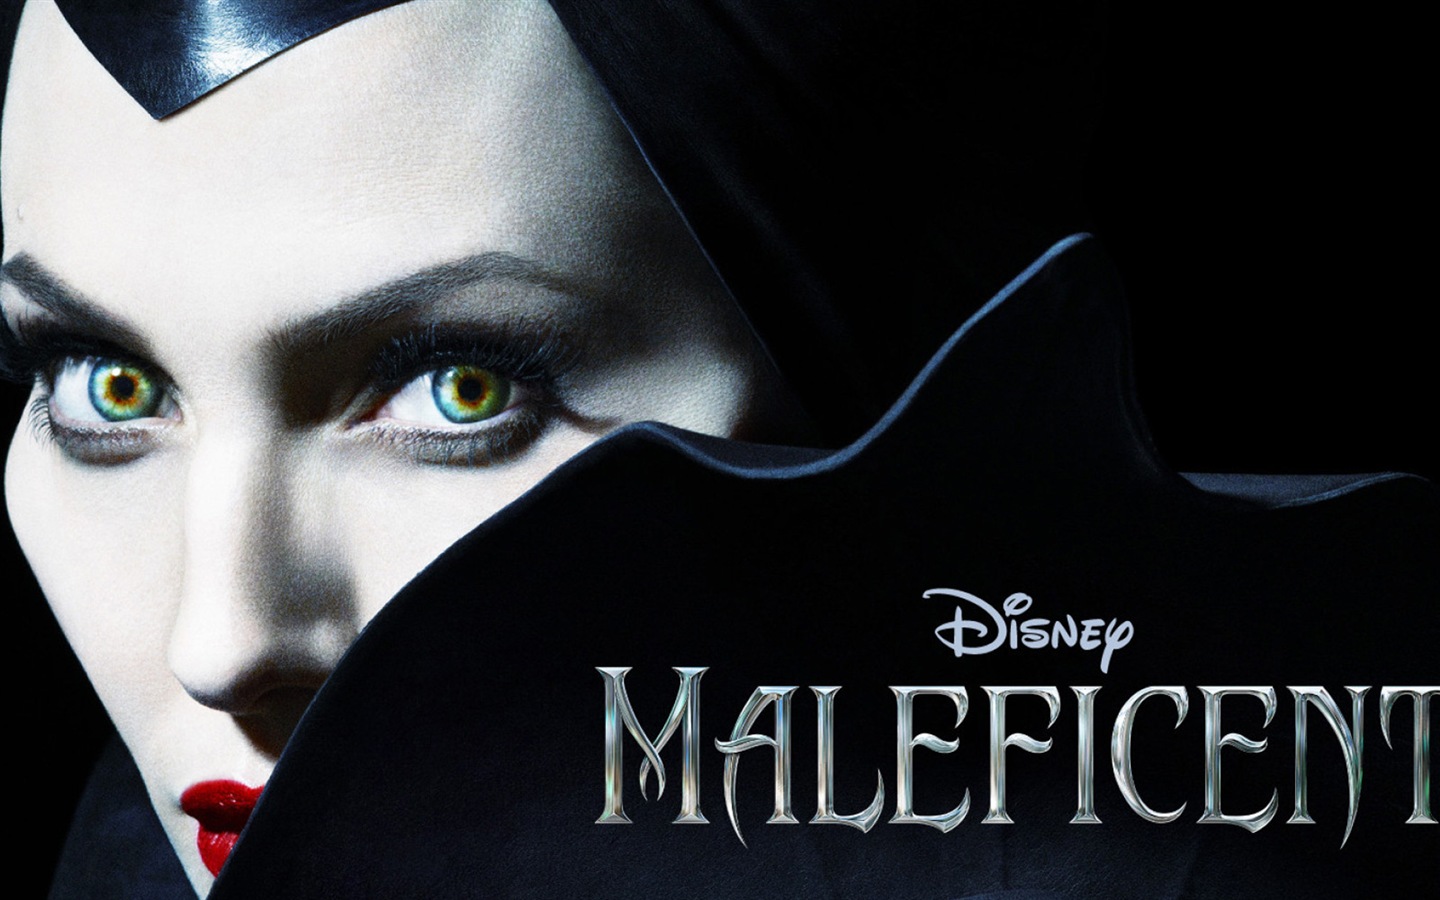 Maleficent 2014 HD movie wallpapers #14 - 1440x900